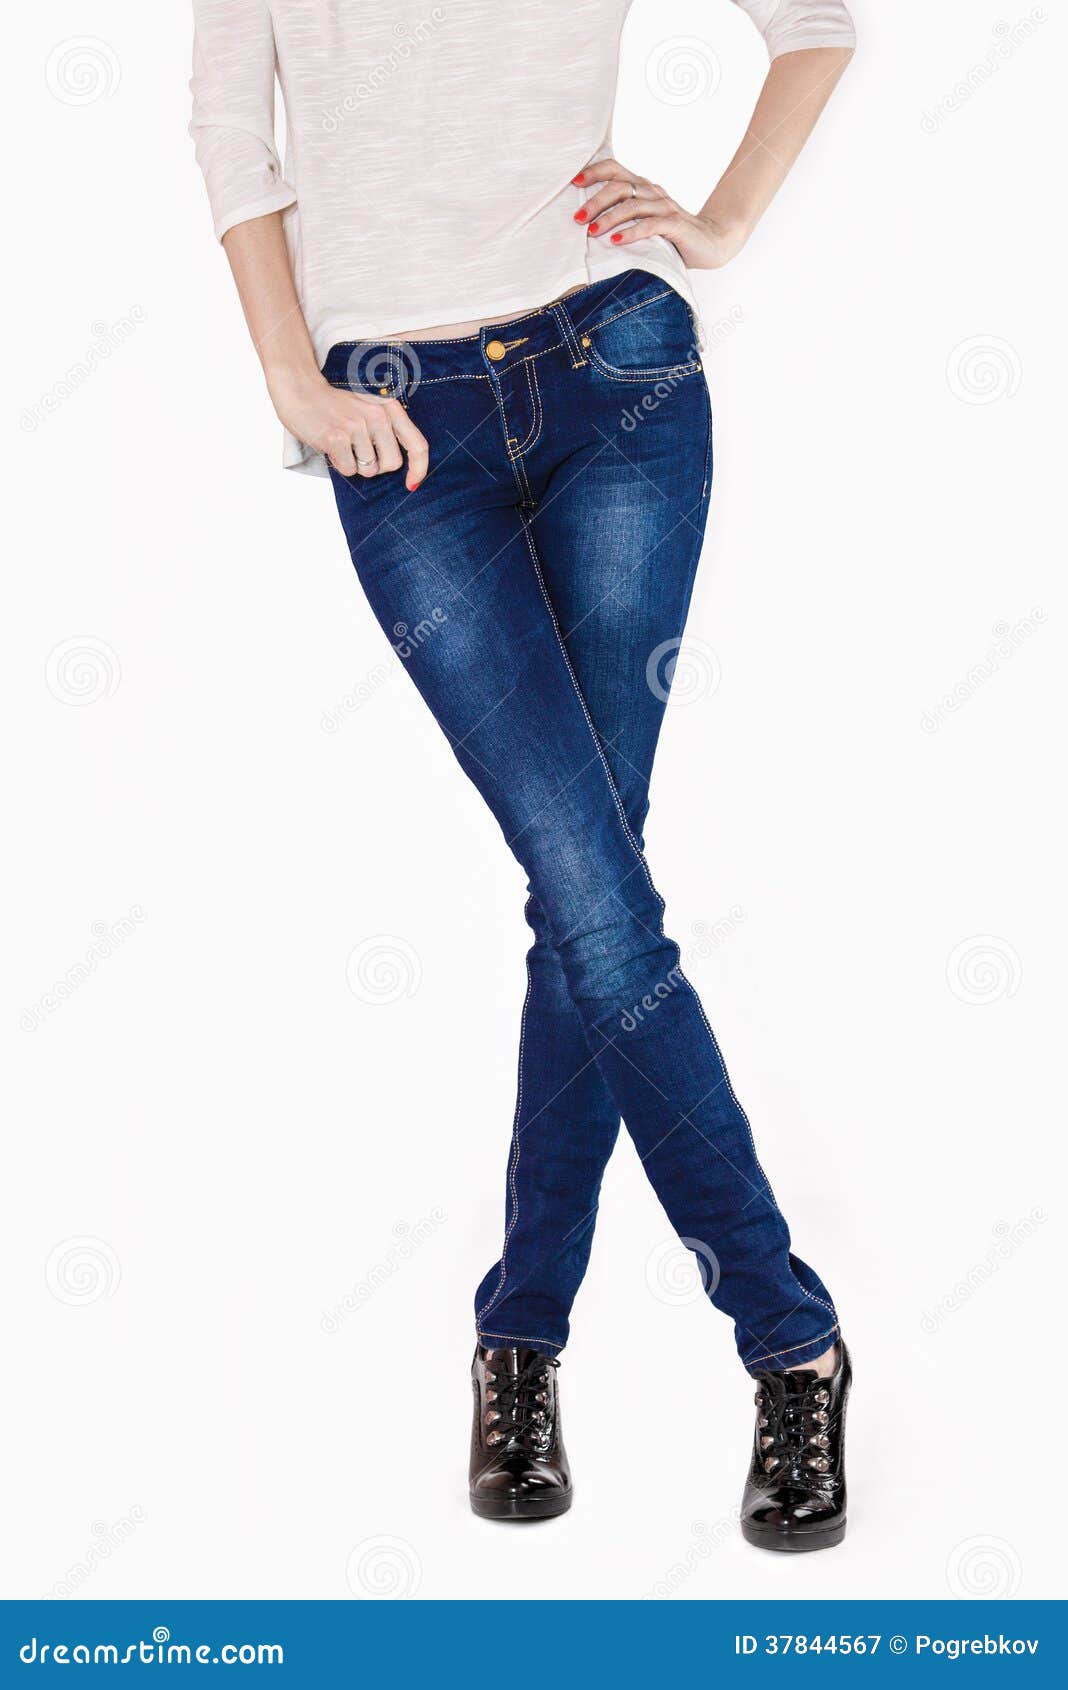 Shapely Female Legs Dressed in Dark Blue Jeans Stock Image - Image of ...